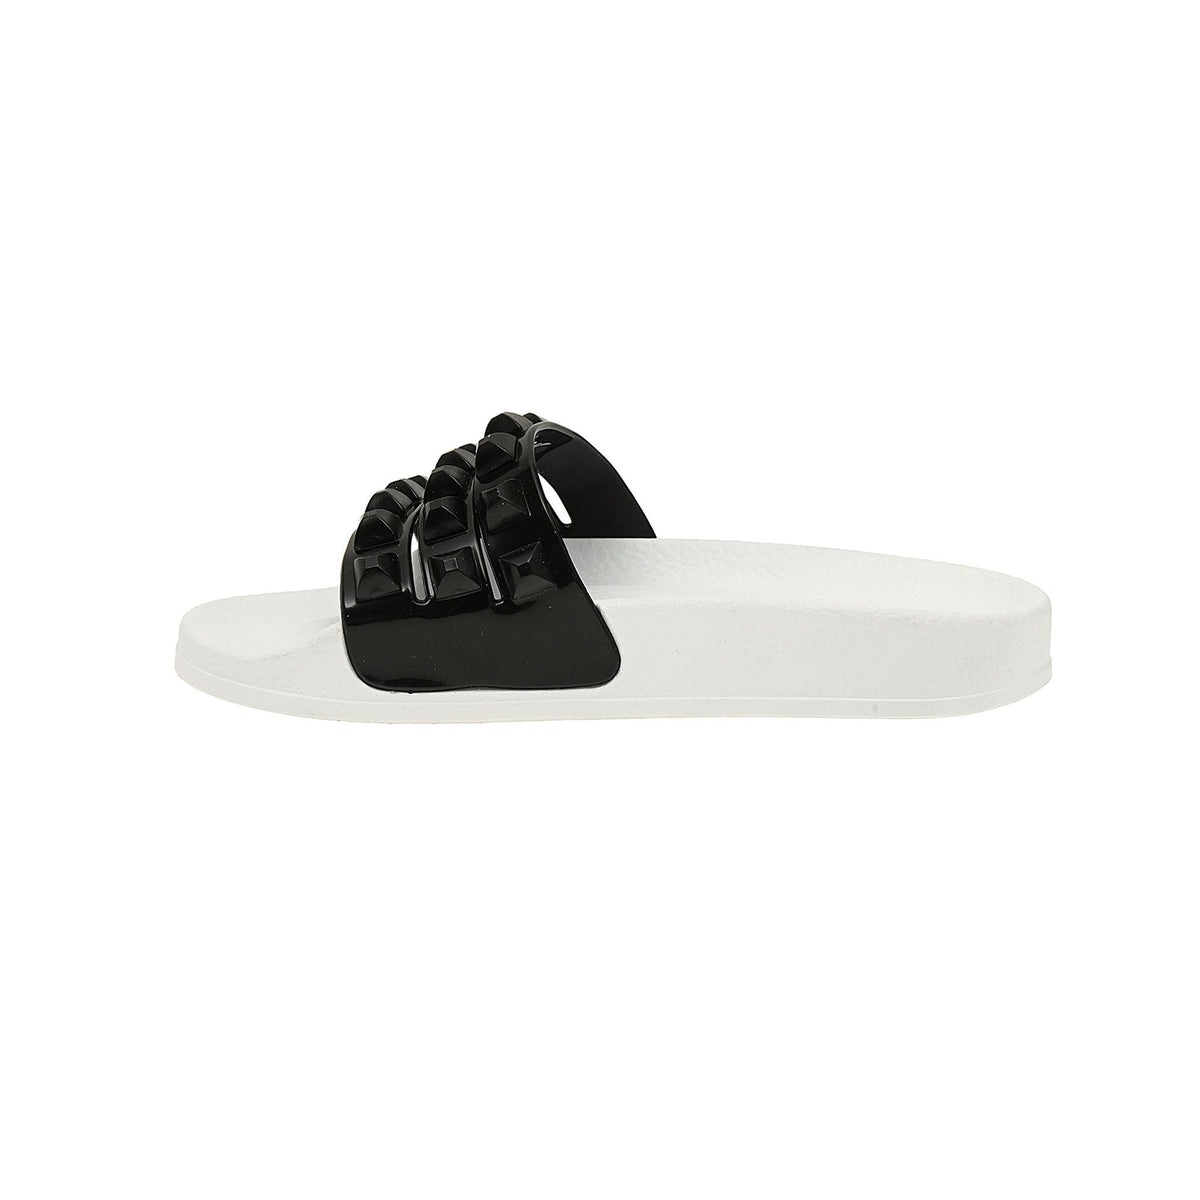 Roddler jelly sandals perfect for beach lovers, white kids sandals, white platform flipflop for kids from minicarmensol.